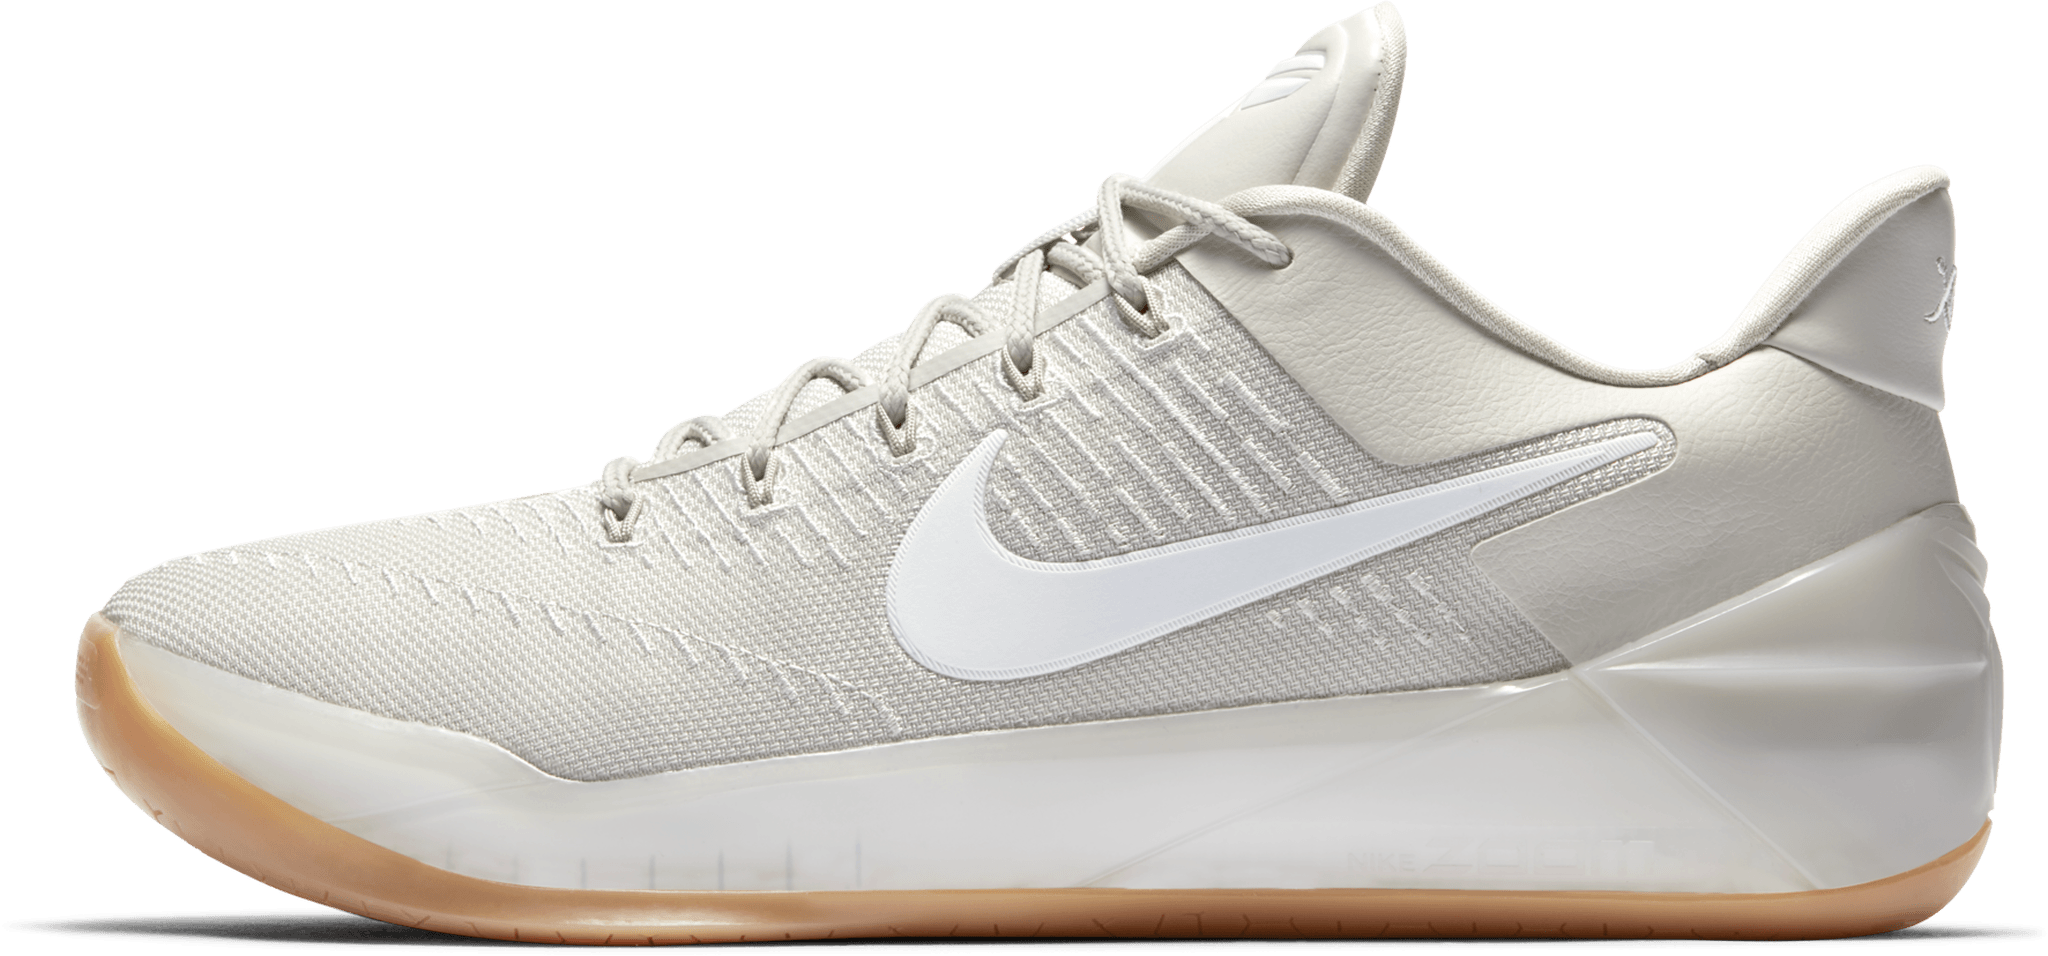 Nike Kobe AD - Review, Deals, Pics of 10 Colorways